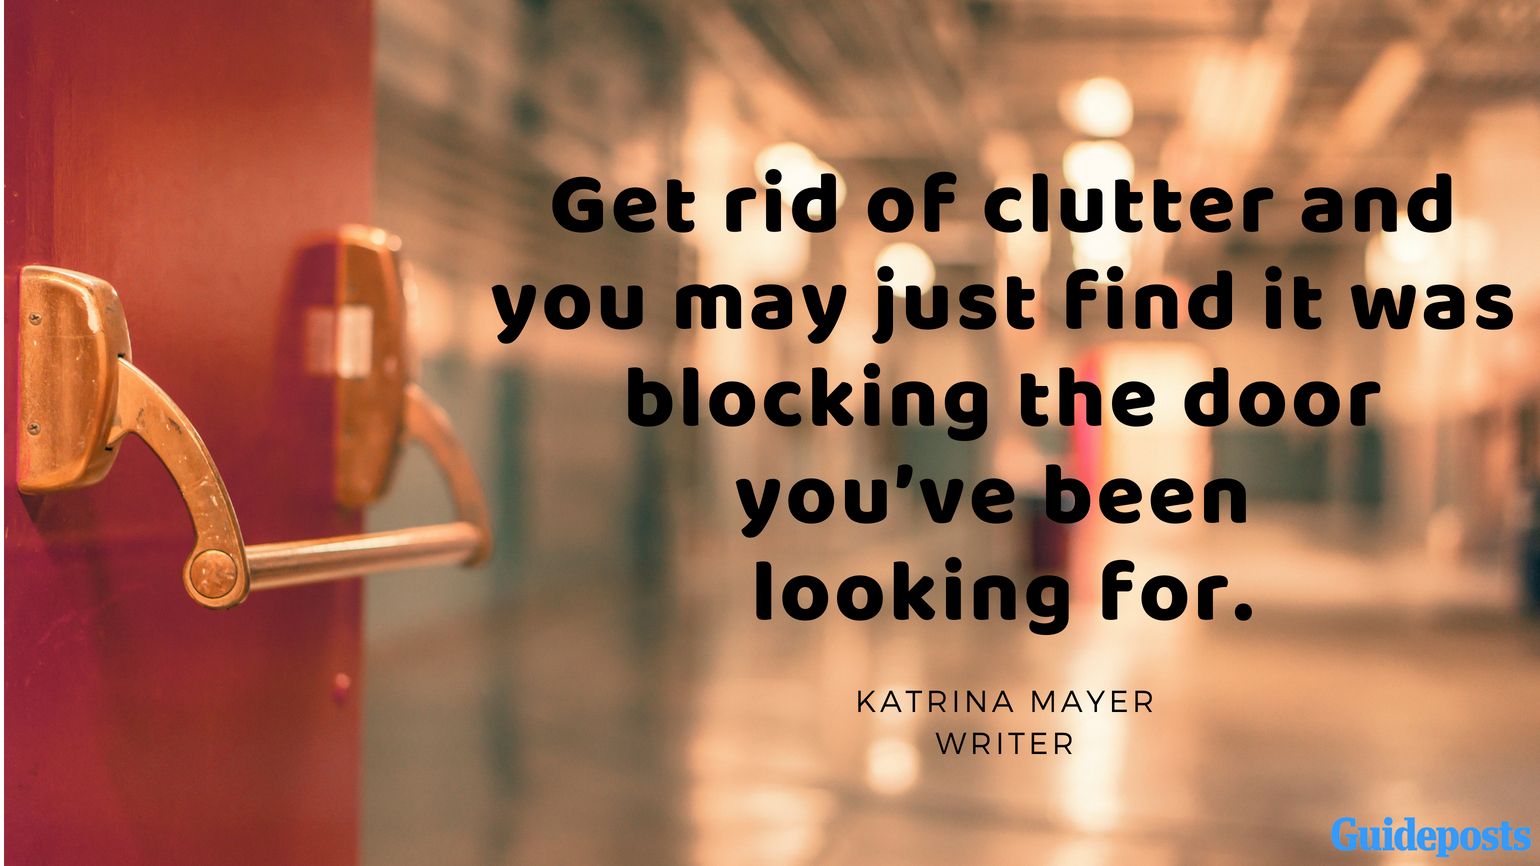 Motivational Quotes for Decluttering: Get rid of clutter and you may just find it was blocking the door you’ve been looking for. - Katrina Mayer, Writer better living life advice